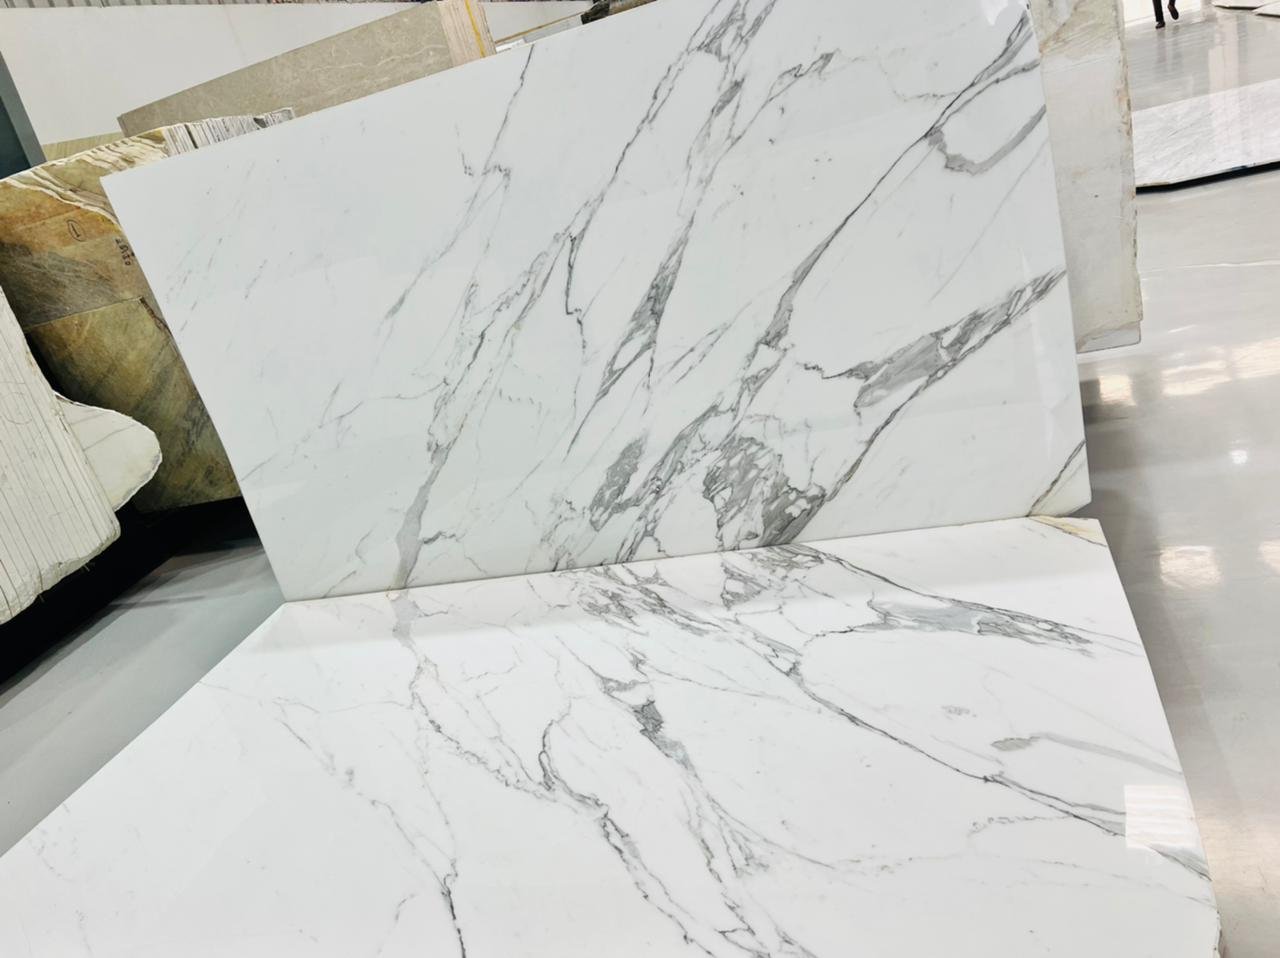 One point destination for Top class marble, granite and building stone.